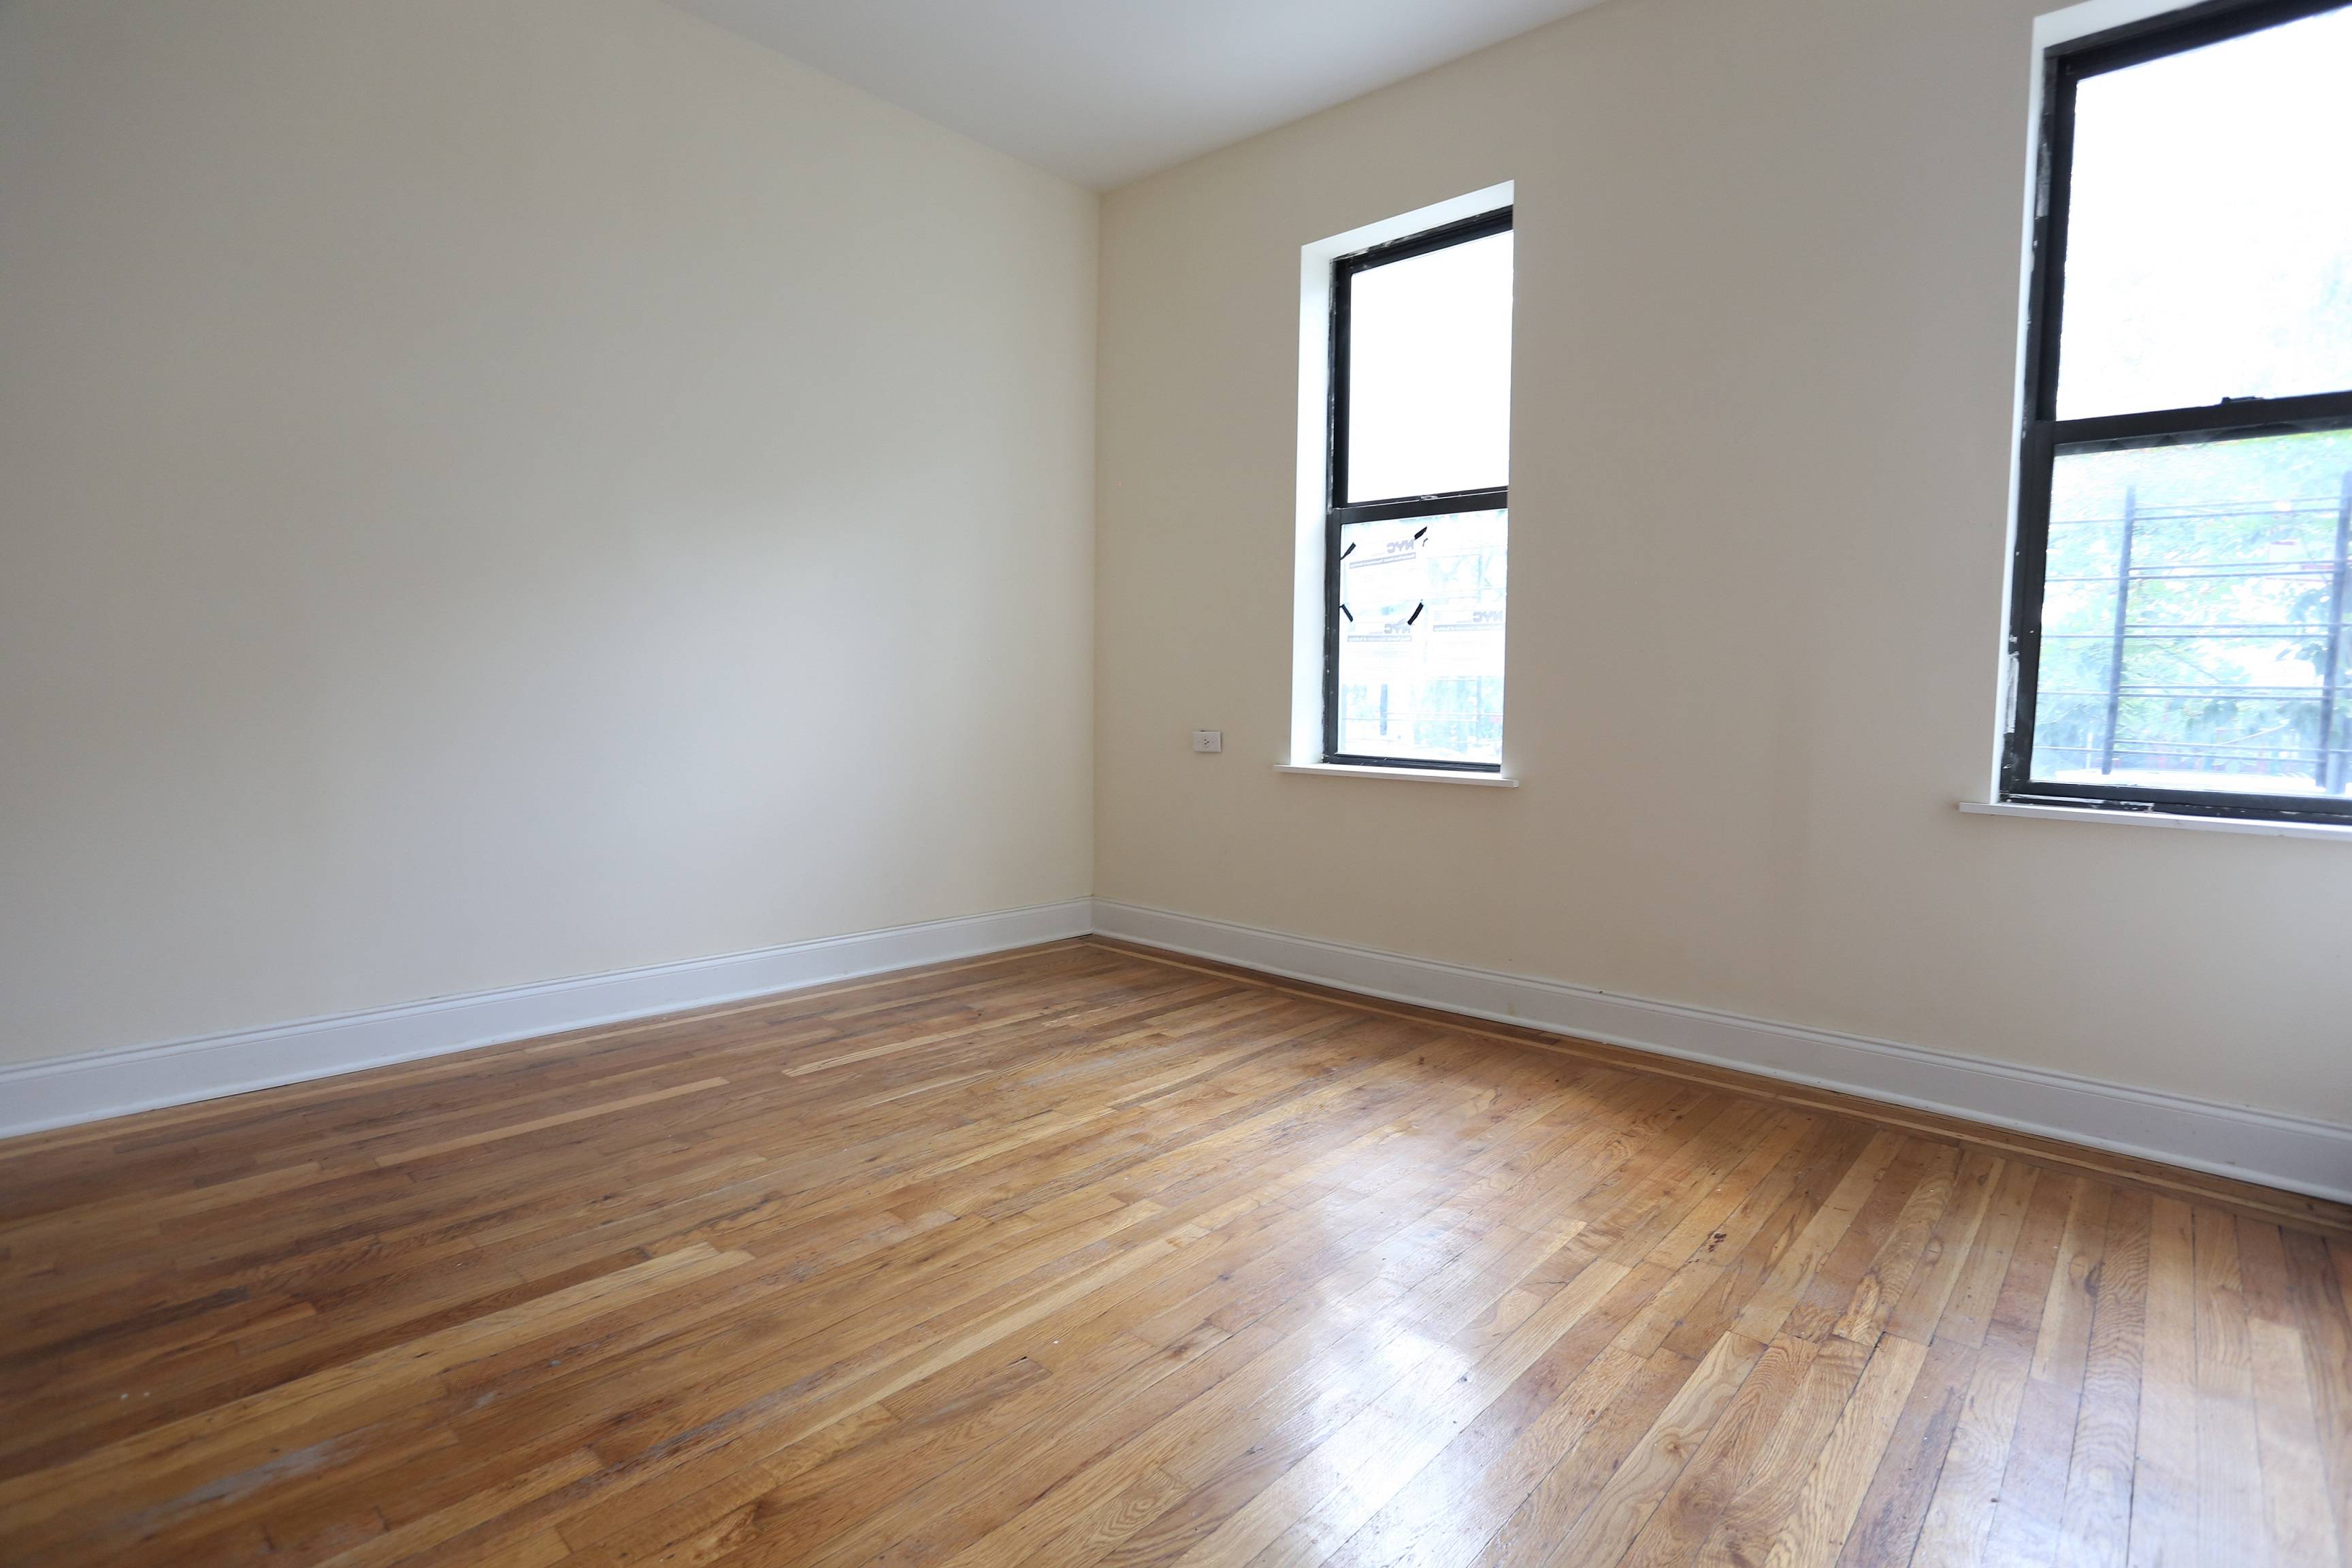 NEWLY RENOVATED 2 BED PLUS OFFICE/BONUS ROOM IN HUDSON HEIGHTS